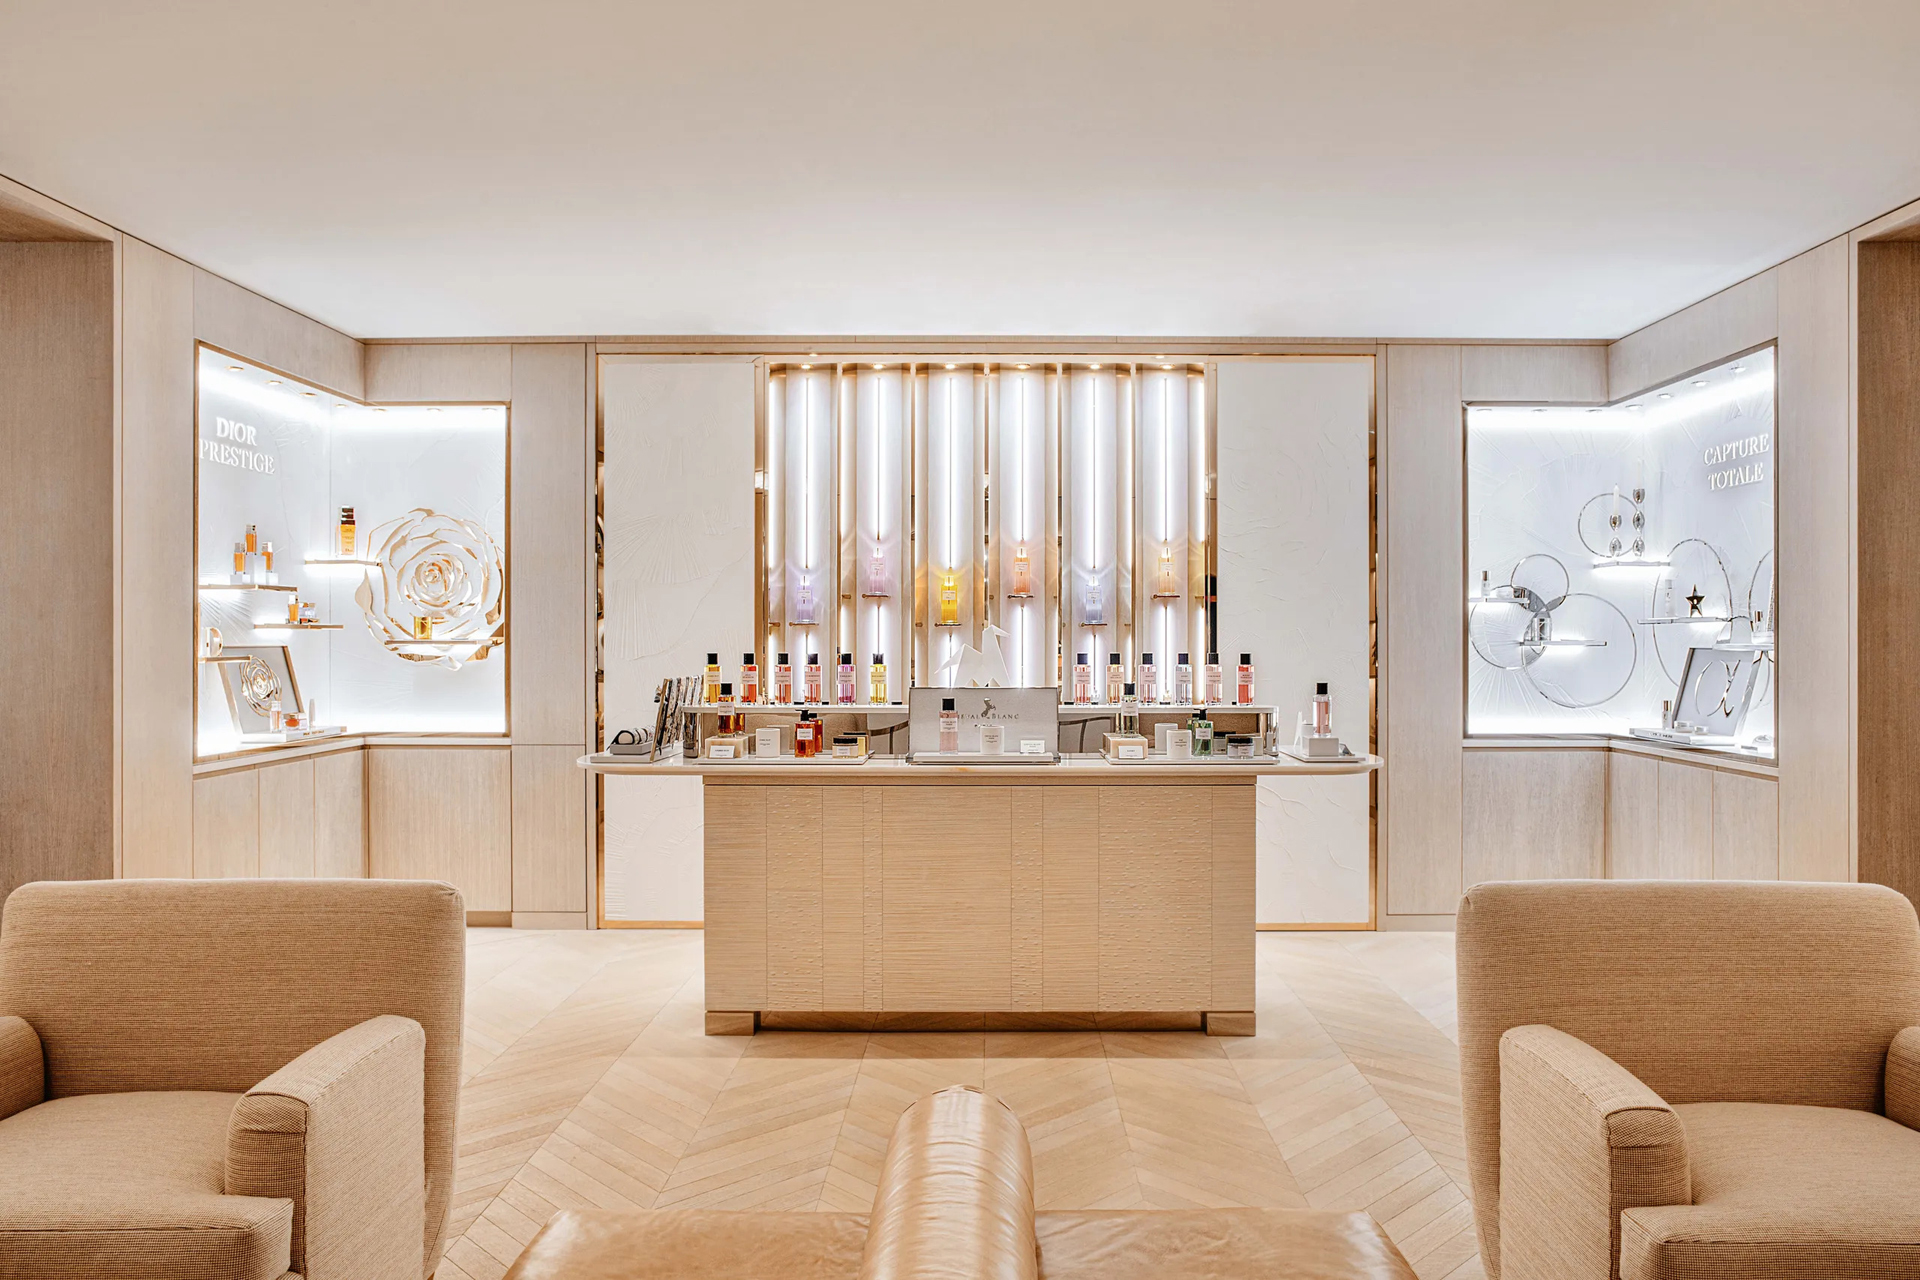 A luxurious waiting room with Dior products on display